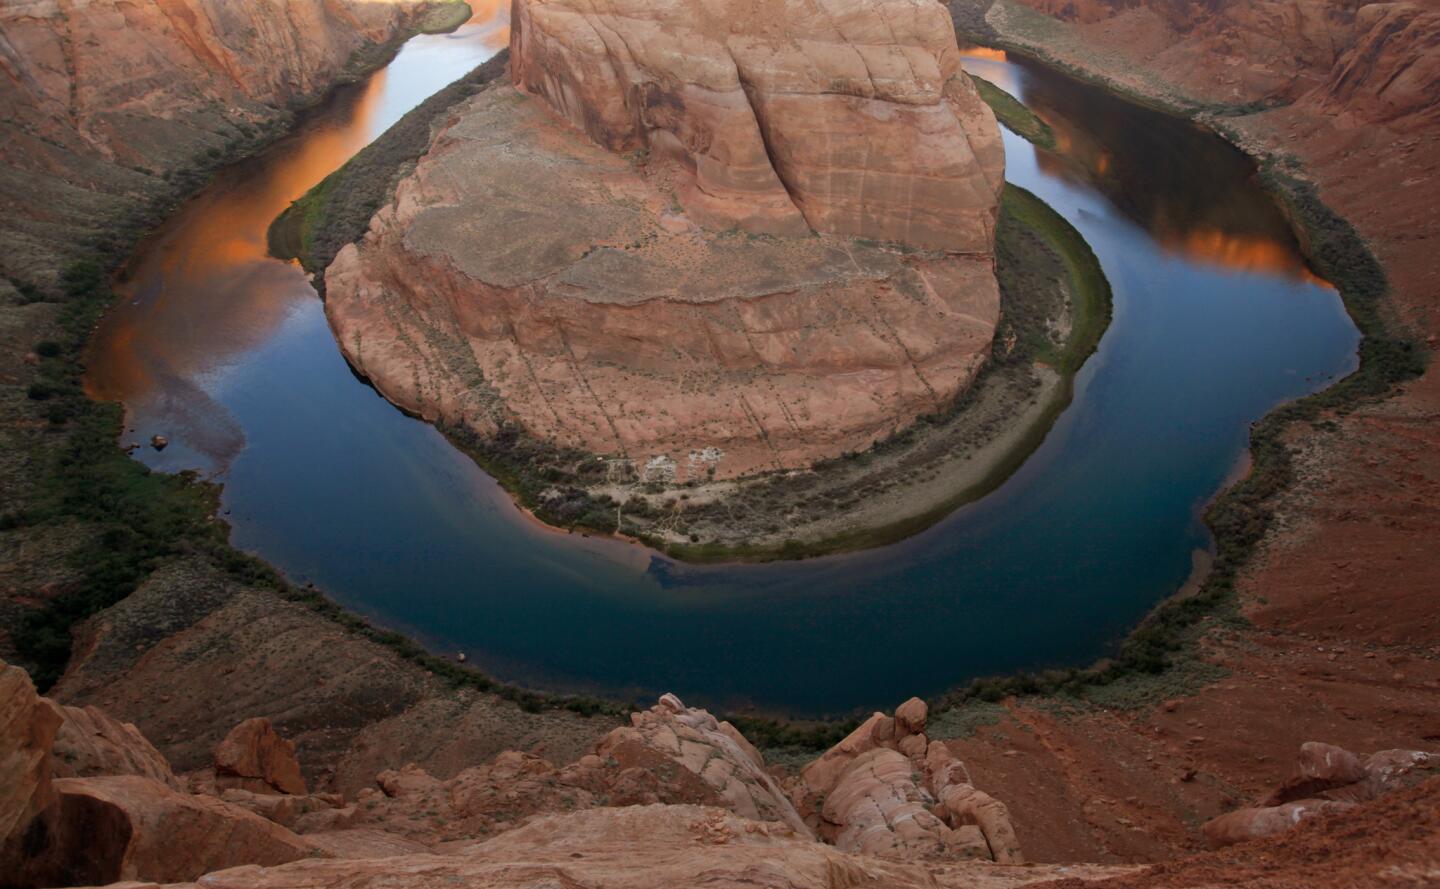 At Horseshoe Bend -- about four miles from the Glen Canyon Dam and Lake Powell -- the Colorado River makes a 270-degree curve.